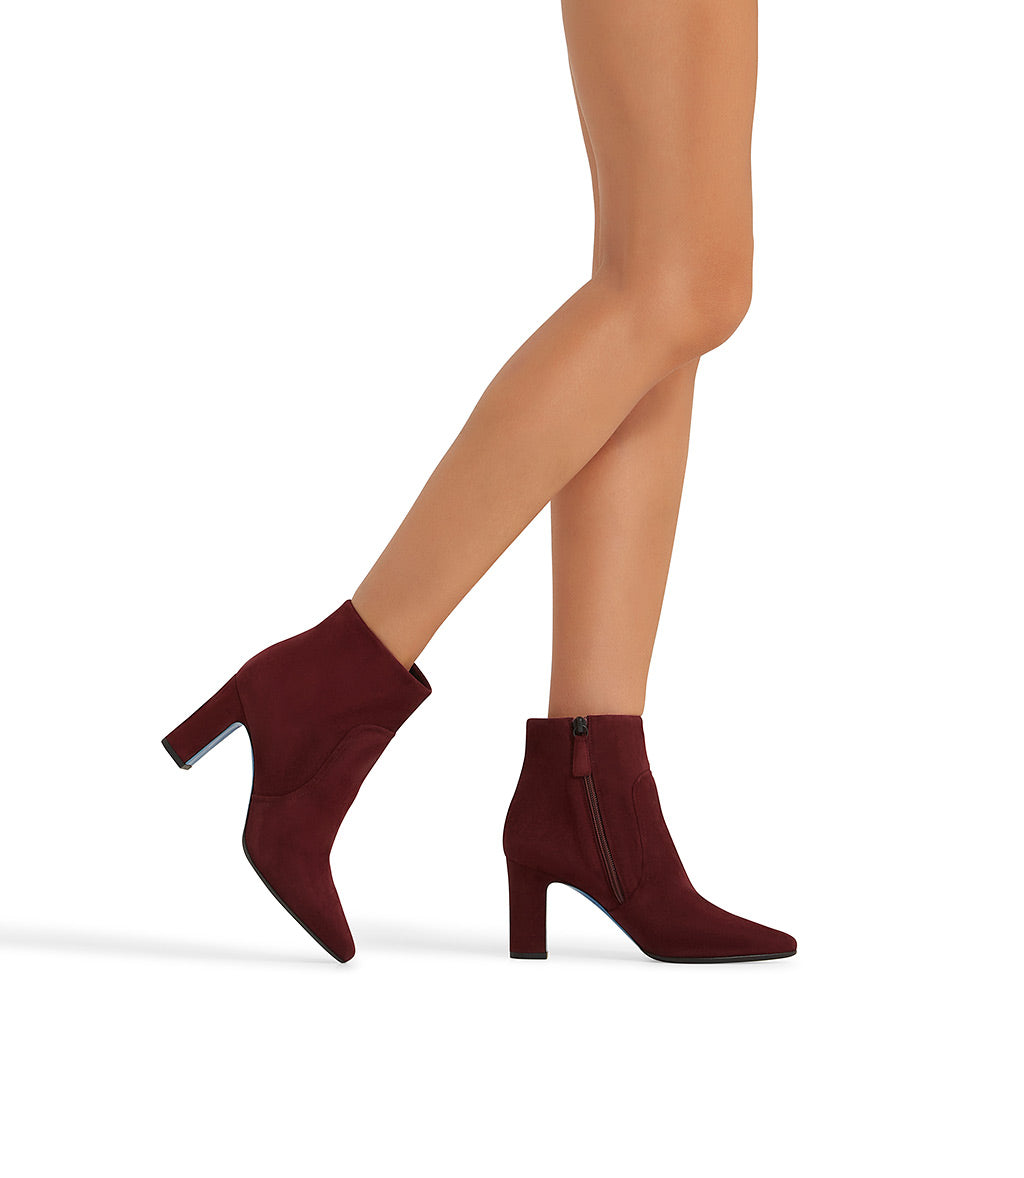 Burgundy suede ankle boots